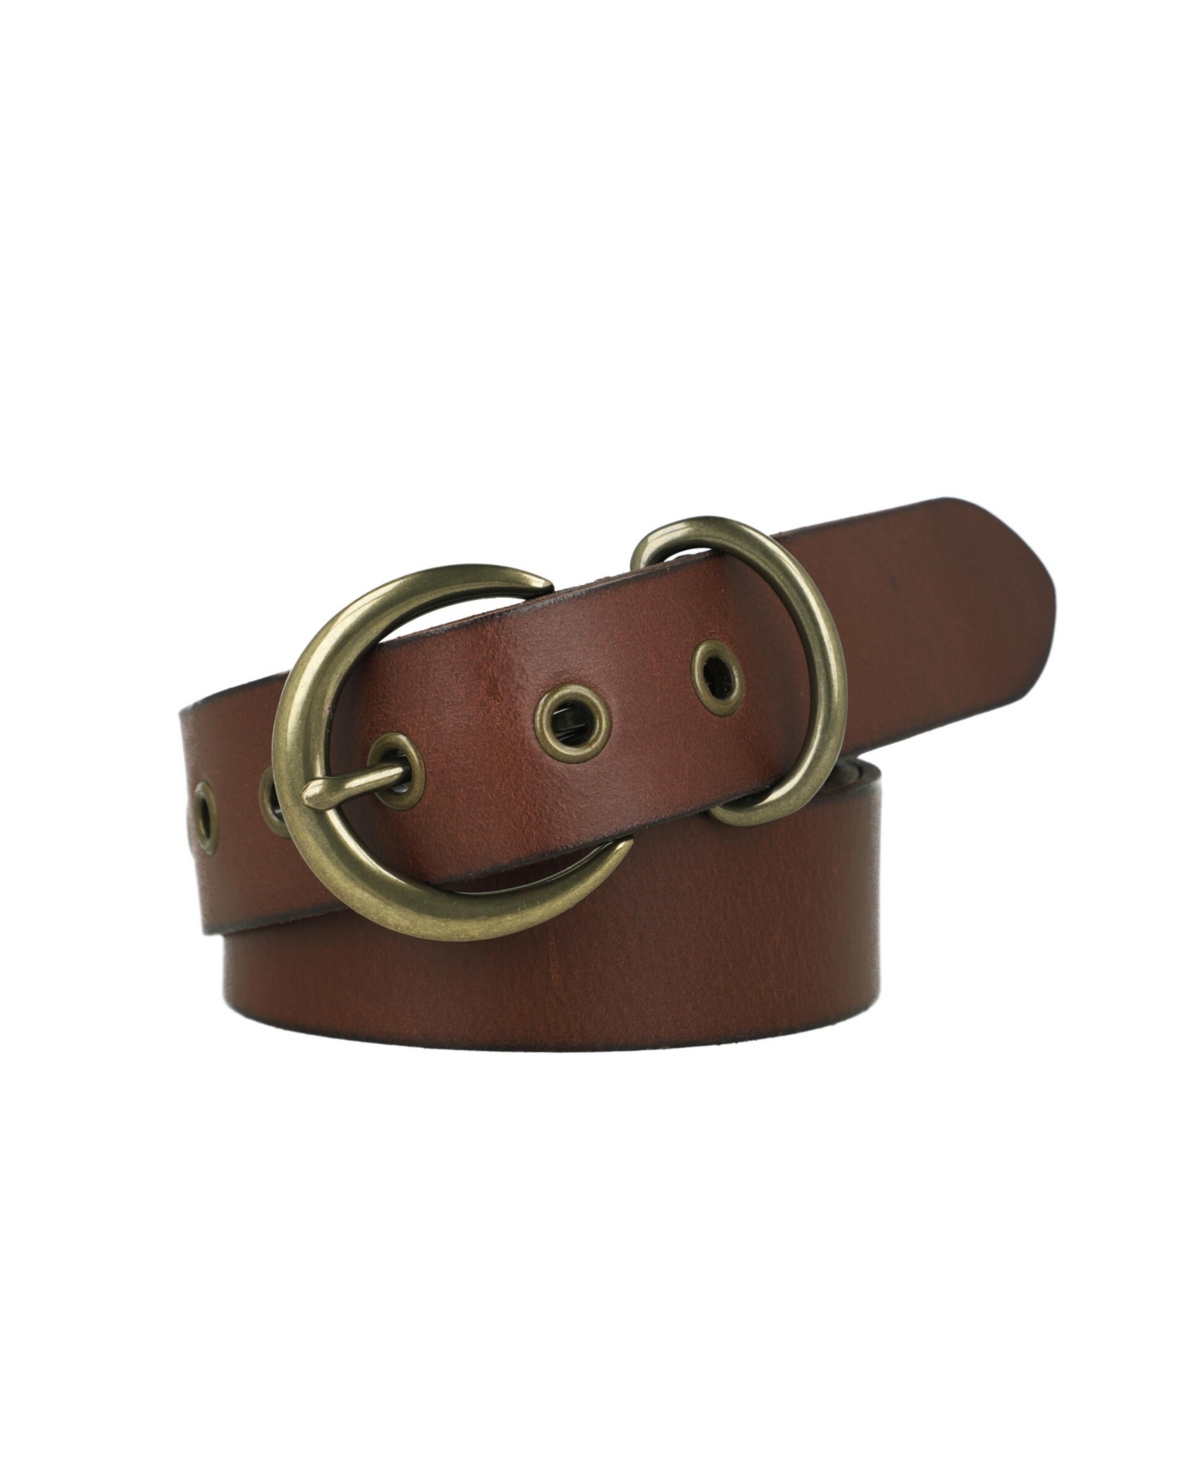 Women's 38mm Flat Strap with Metal Keeper Leather Belt - Brown